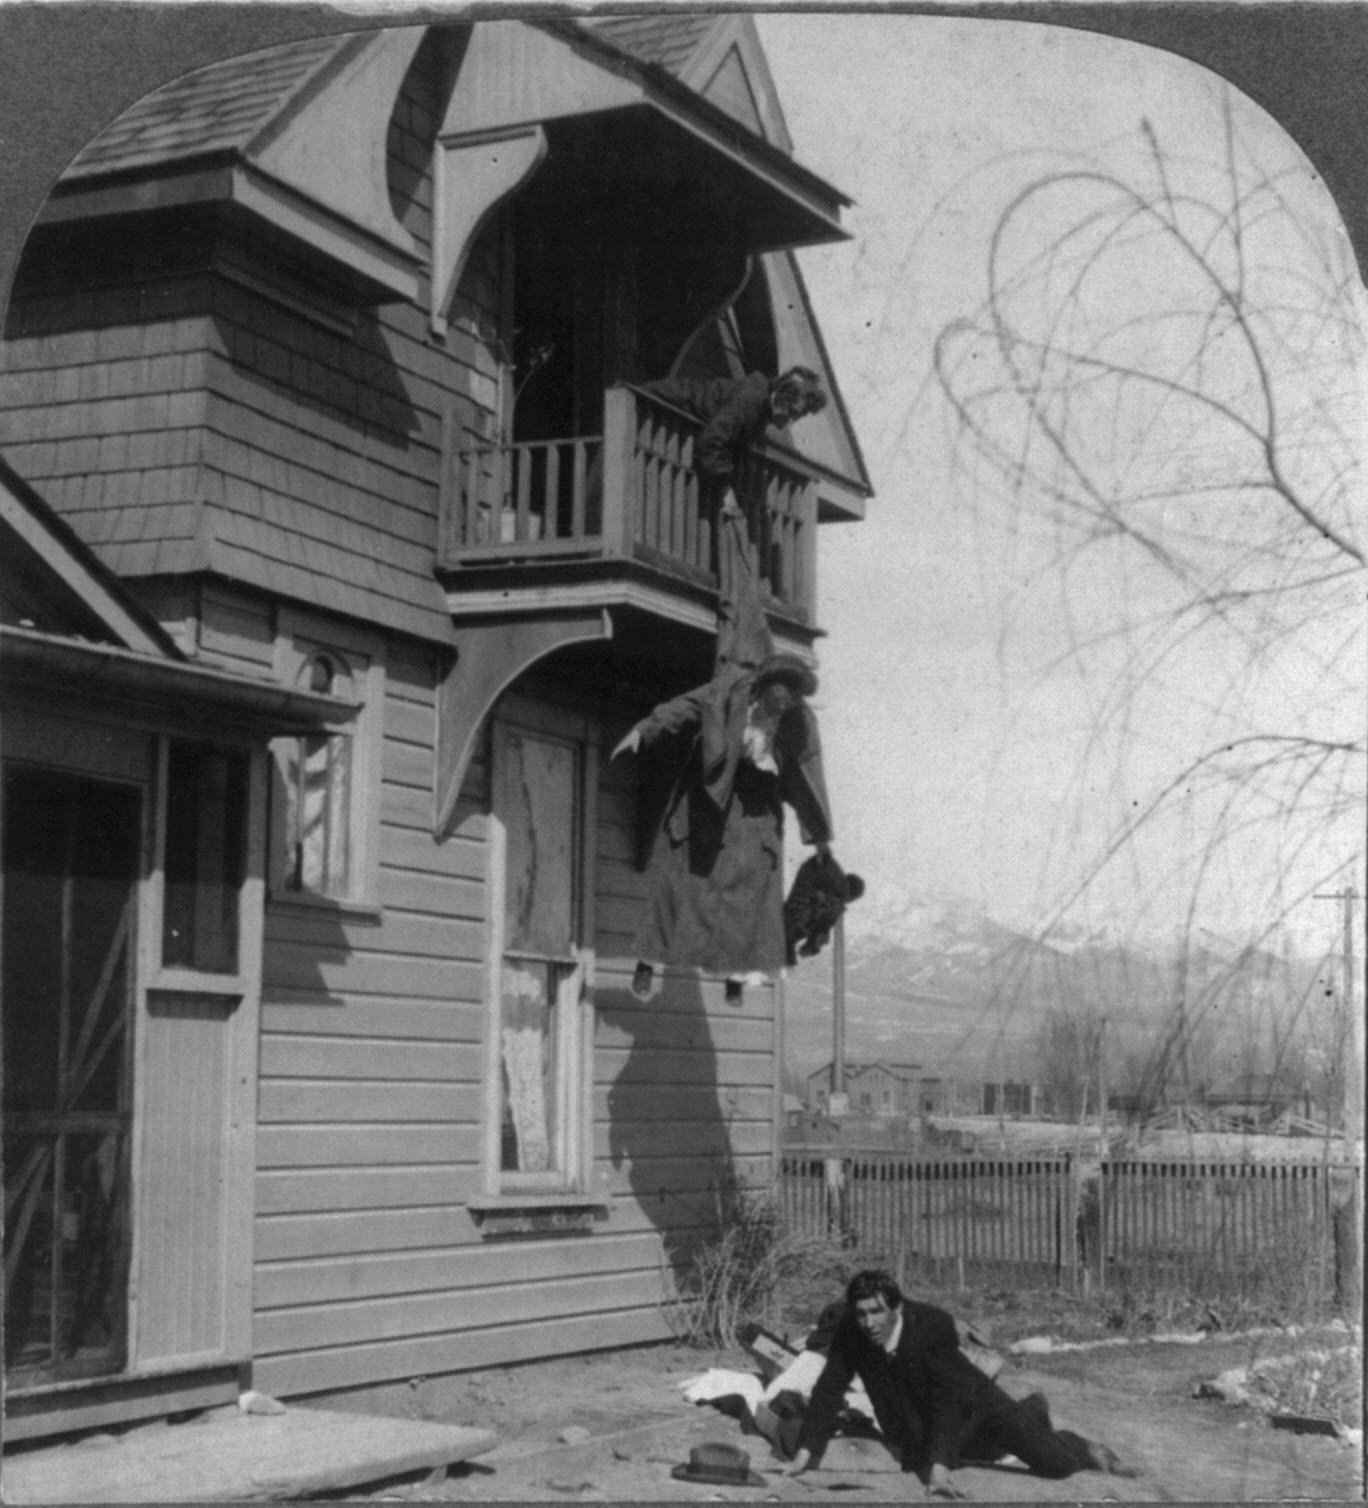 Humorous scene of old woman preventing young woman from elopement by holding her by the coat as she is jumping off balcony, 1905.jpg